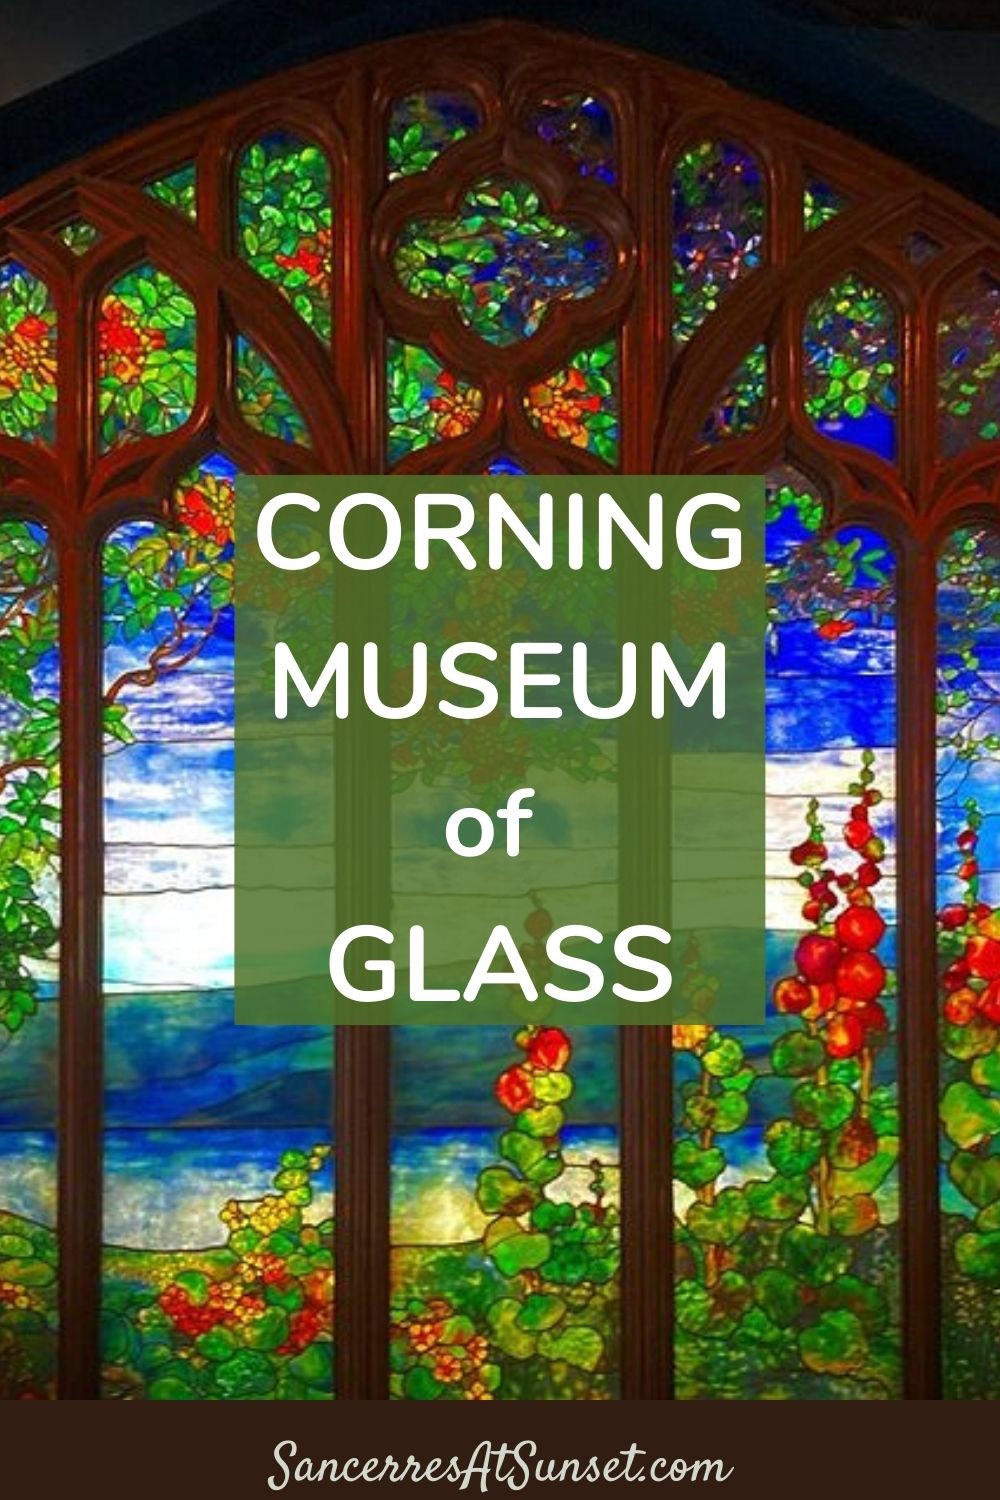 Corning Museum of Glass -- celebrating 35 centuries of art, science, and history in New York